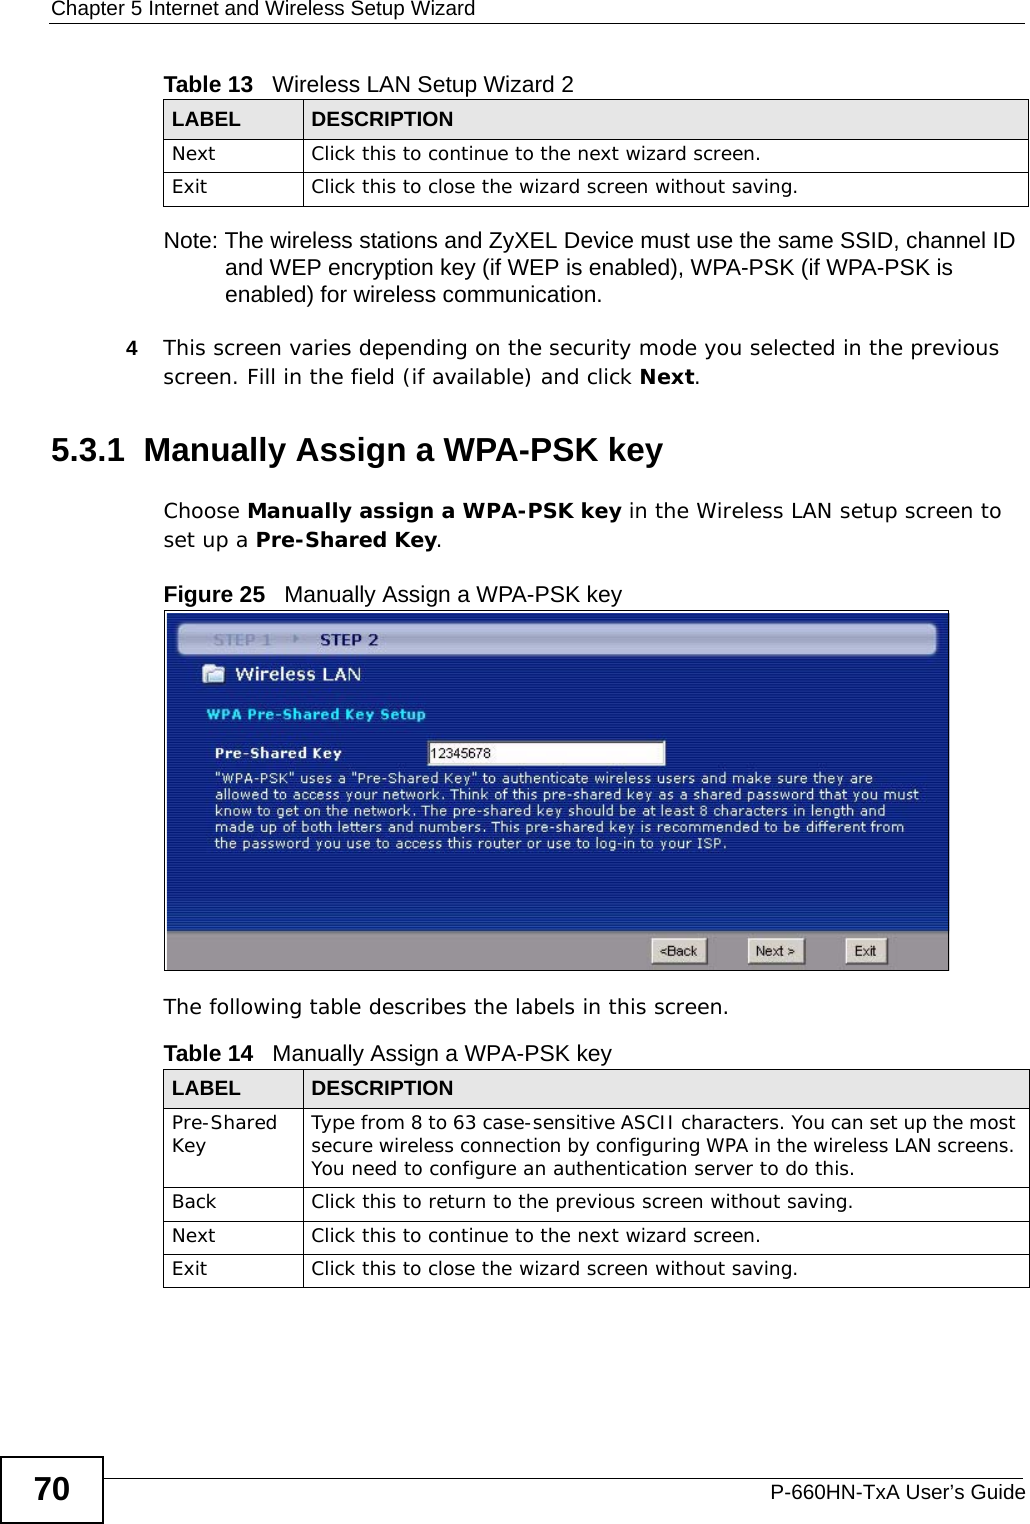 Chapter 5 Internet and Wireless Setup WizardP-660HN-TxA User’s Guide70Note: The wireless stations and ZyXEL Device must use the same SSID, channel ID and WEP encryption key (if WEP is enabled), WPA-PSK (if WPA-PSK is enabled) for wireless communication.4This screen varies depending on the security mode you selected in the previous screen. Fill in the field (if available) and click Next.5.3.1  Manually Assign a WPA-PSK keyChoose Manually assign a WPA-PSK key in the Wireless LAN setup screen to set up a Pre-Shared Key.Figure 25   Manually Assign a WPA-PSK keyThe following table describes the labels in this screen. Next Click this to continue to the next wizard screen.Exit Click this to close the wizard screen without saving.Table 13   Wireless LAN Setup Wizard 2LABEL DESCRIPTIONTable 14   Manually Assign a WPA-PSK keyLABEL DESCRIPTIONPre-Shared Key Type from 8 to 63 case-sensitive ASCII characters. You can set up the most secure wireless connection by configuring WPA in the wireless LAN screens. You need to configure an authentication server to do this.Back Click this to return to the previous screen without saving.Next Click this to continue to the next wizard screen.Exit Click this to close the wizard screen without saving.